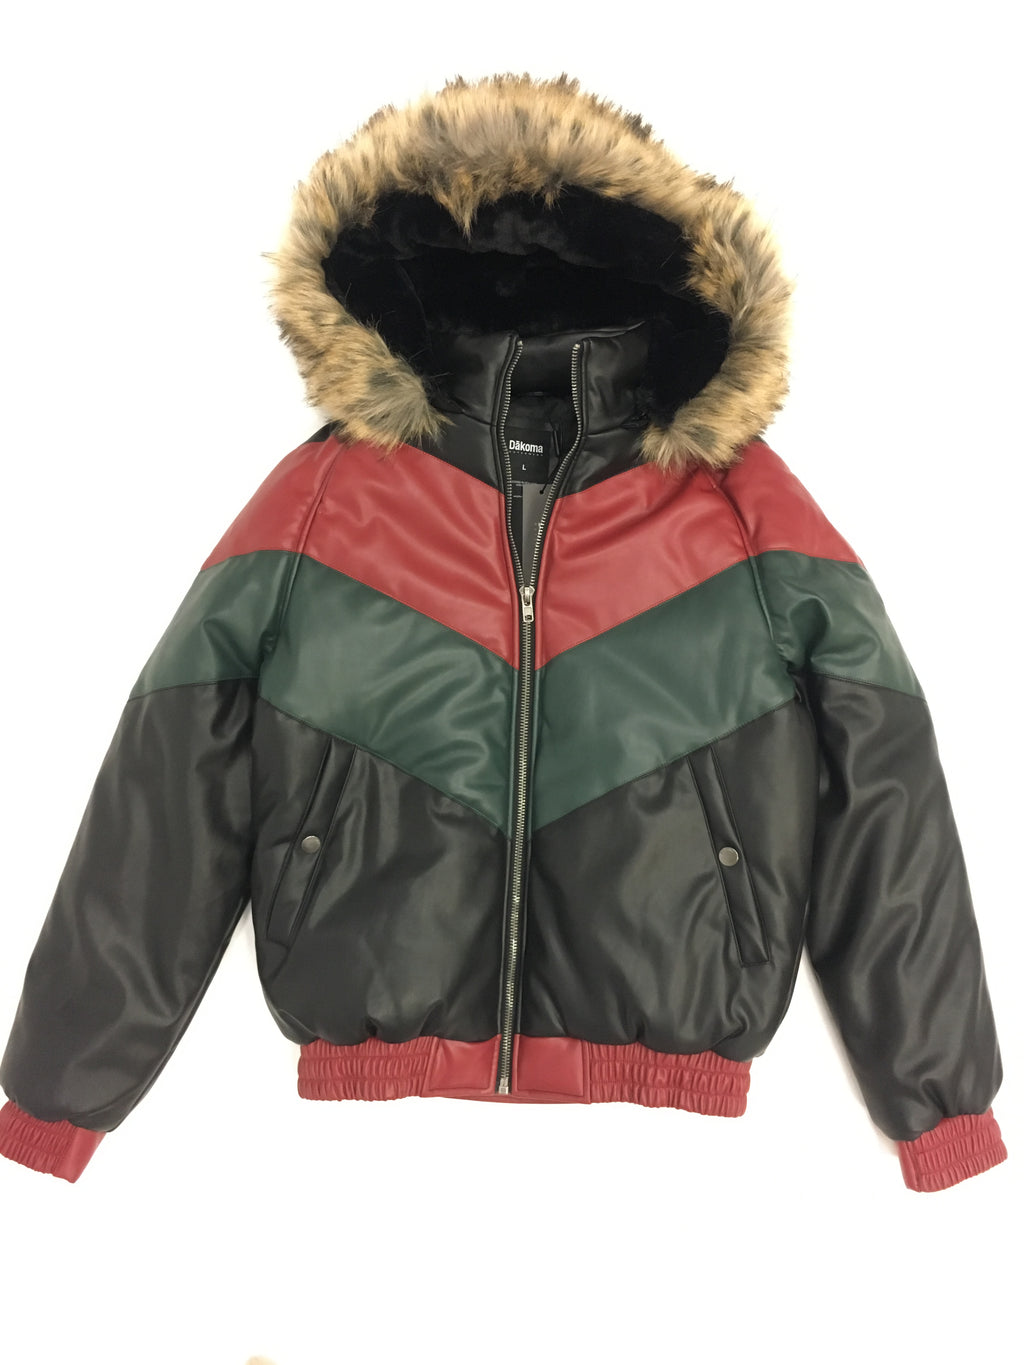 Kids Faux Leather V Bomber Jacket with Detachable Faux Fur Hood - Red,Green,Black